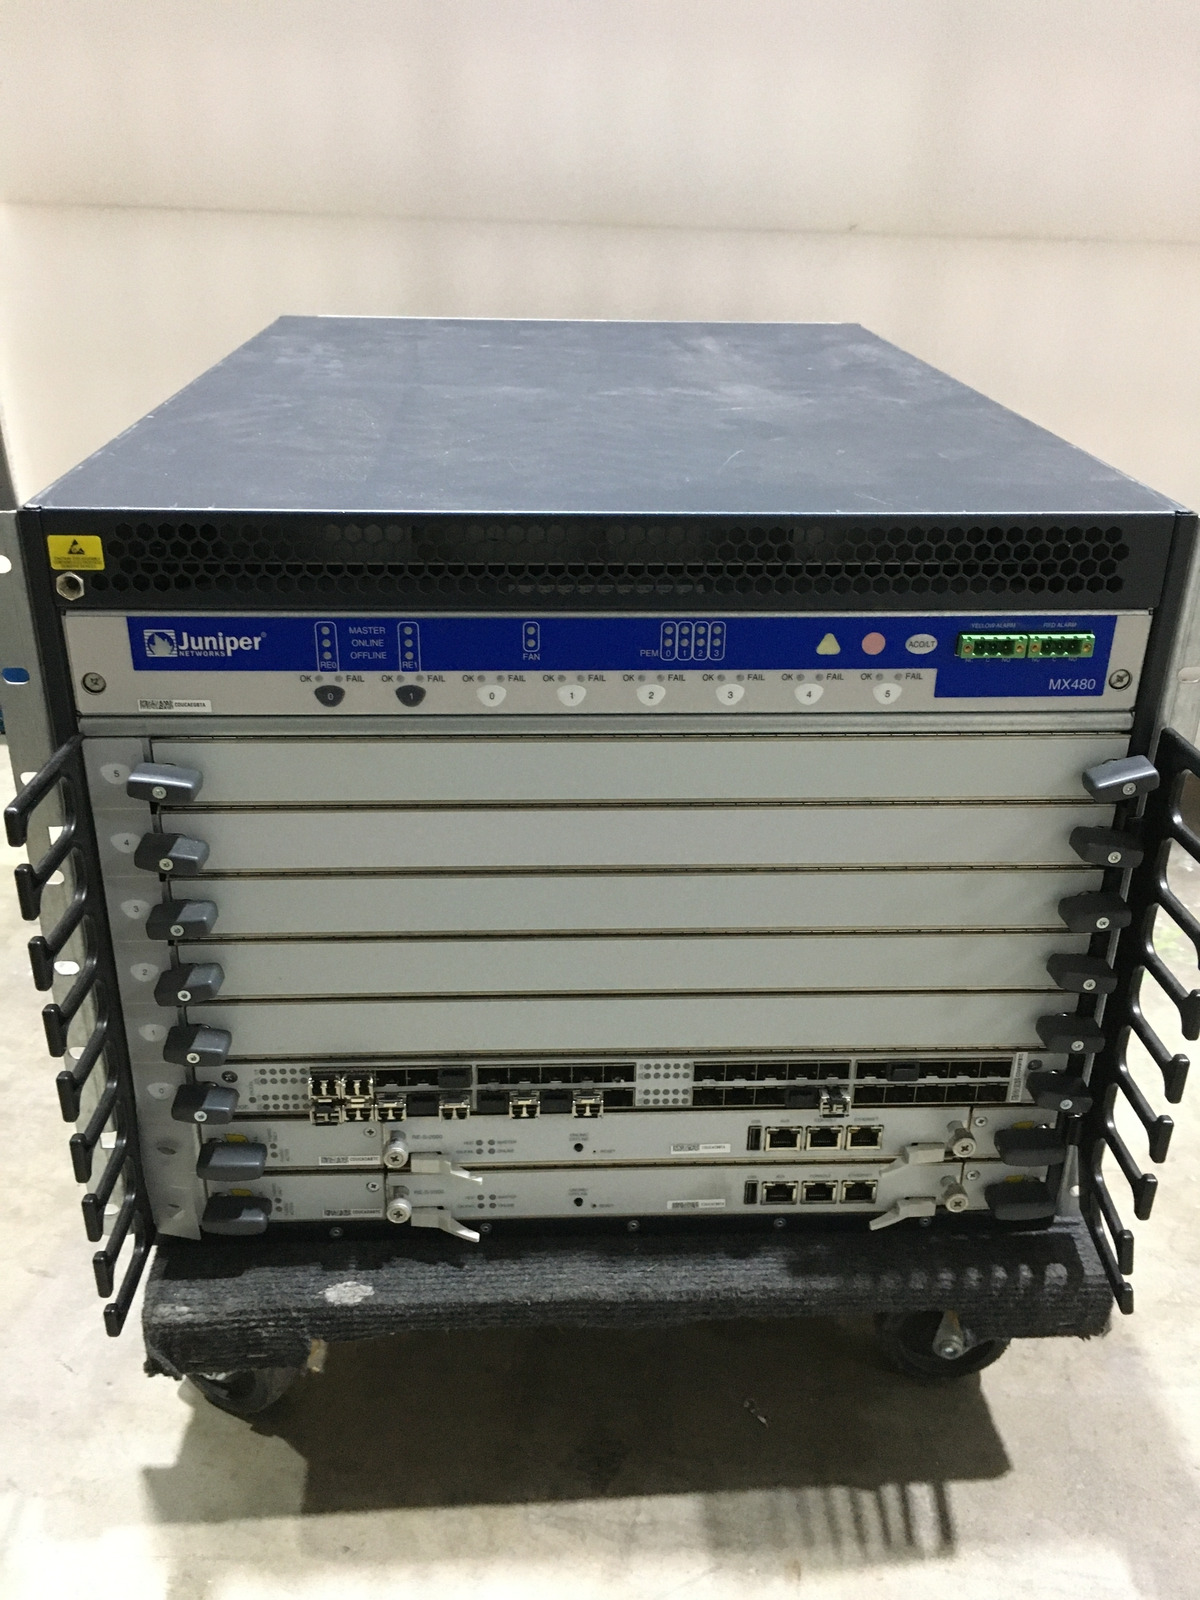 JUNIPER MX480 ETHERNET SERVICES ROUTER with cards no psu